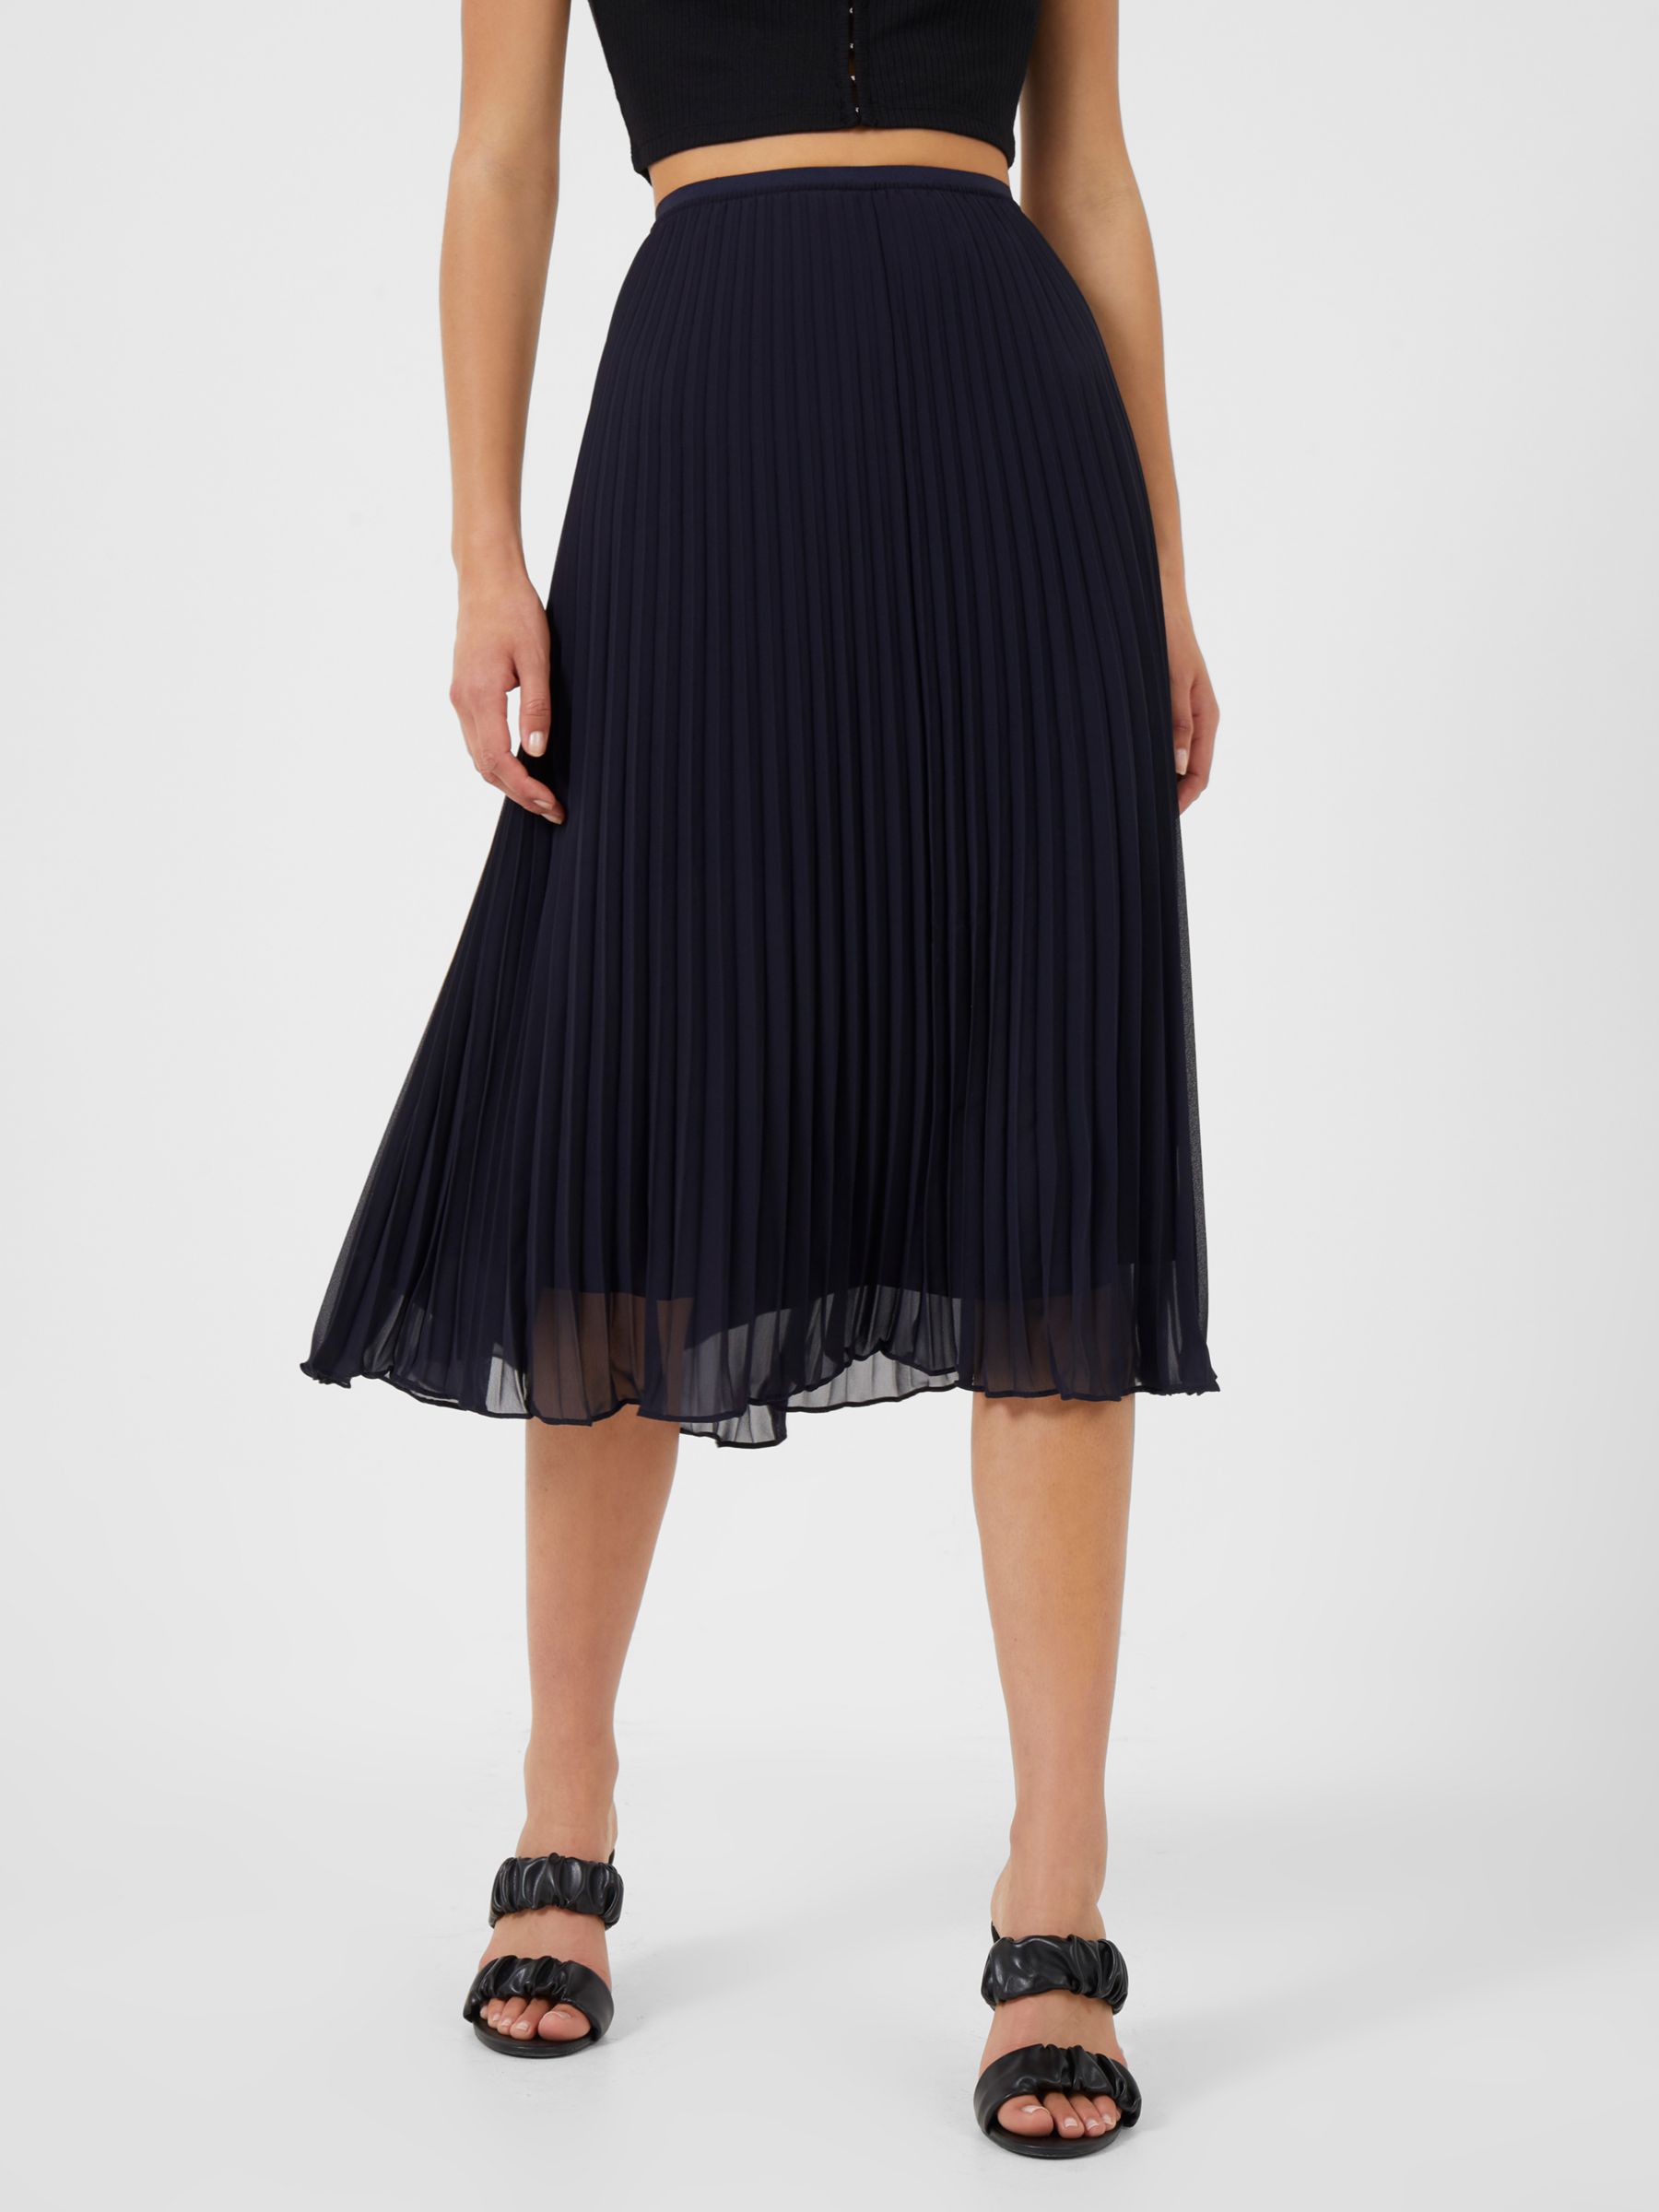 French Connection Ella Pleated Midi Skirt, Black at John Lewis & Partners